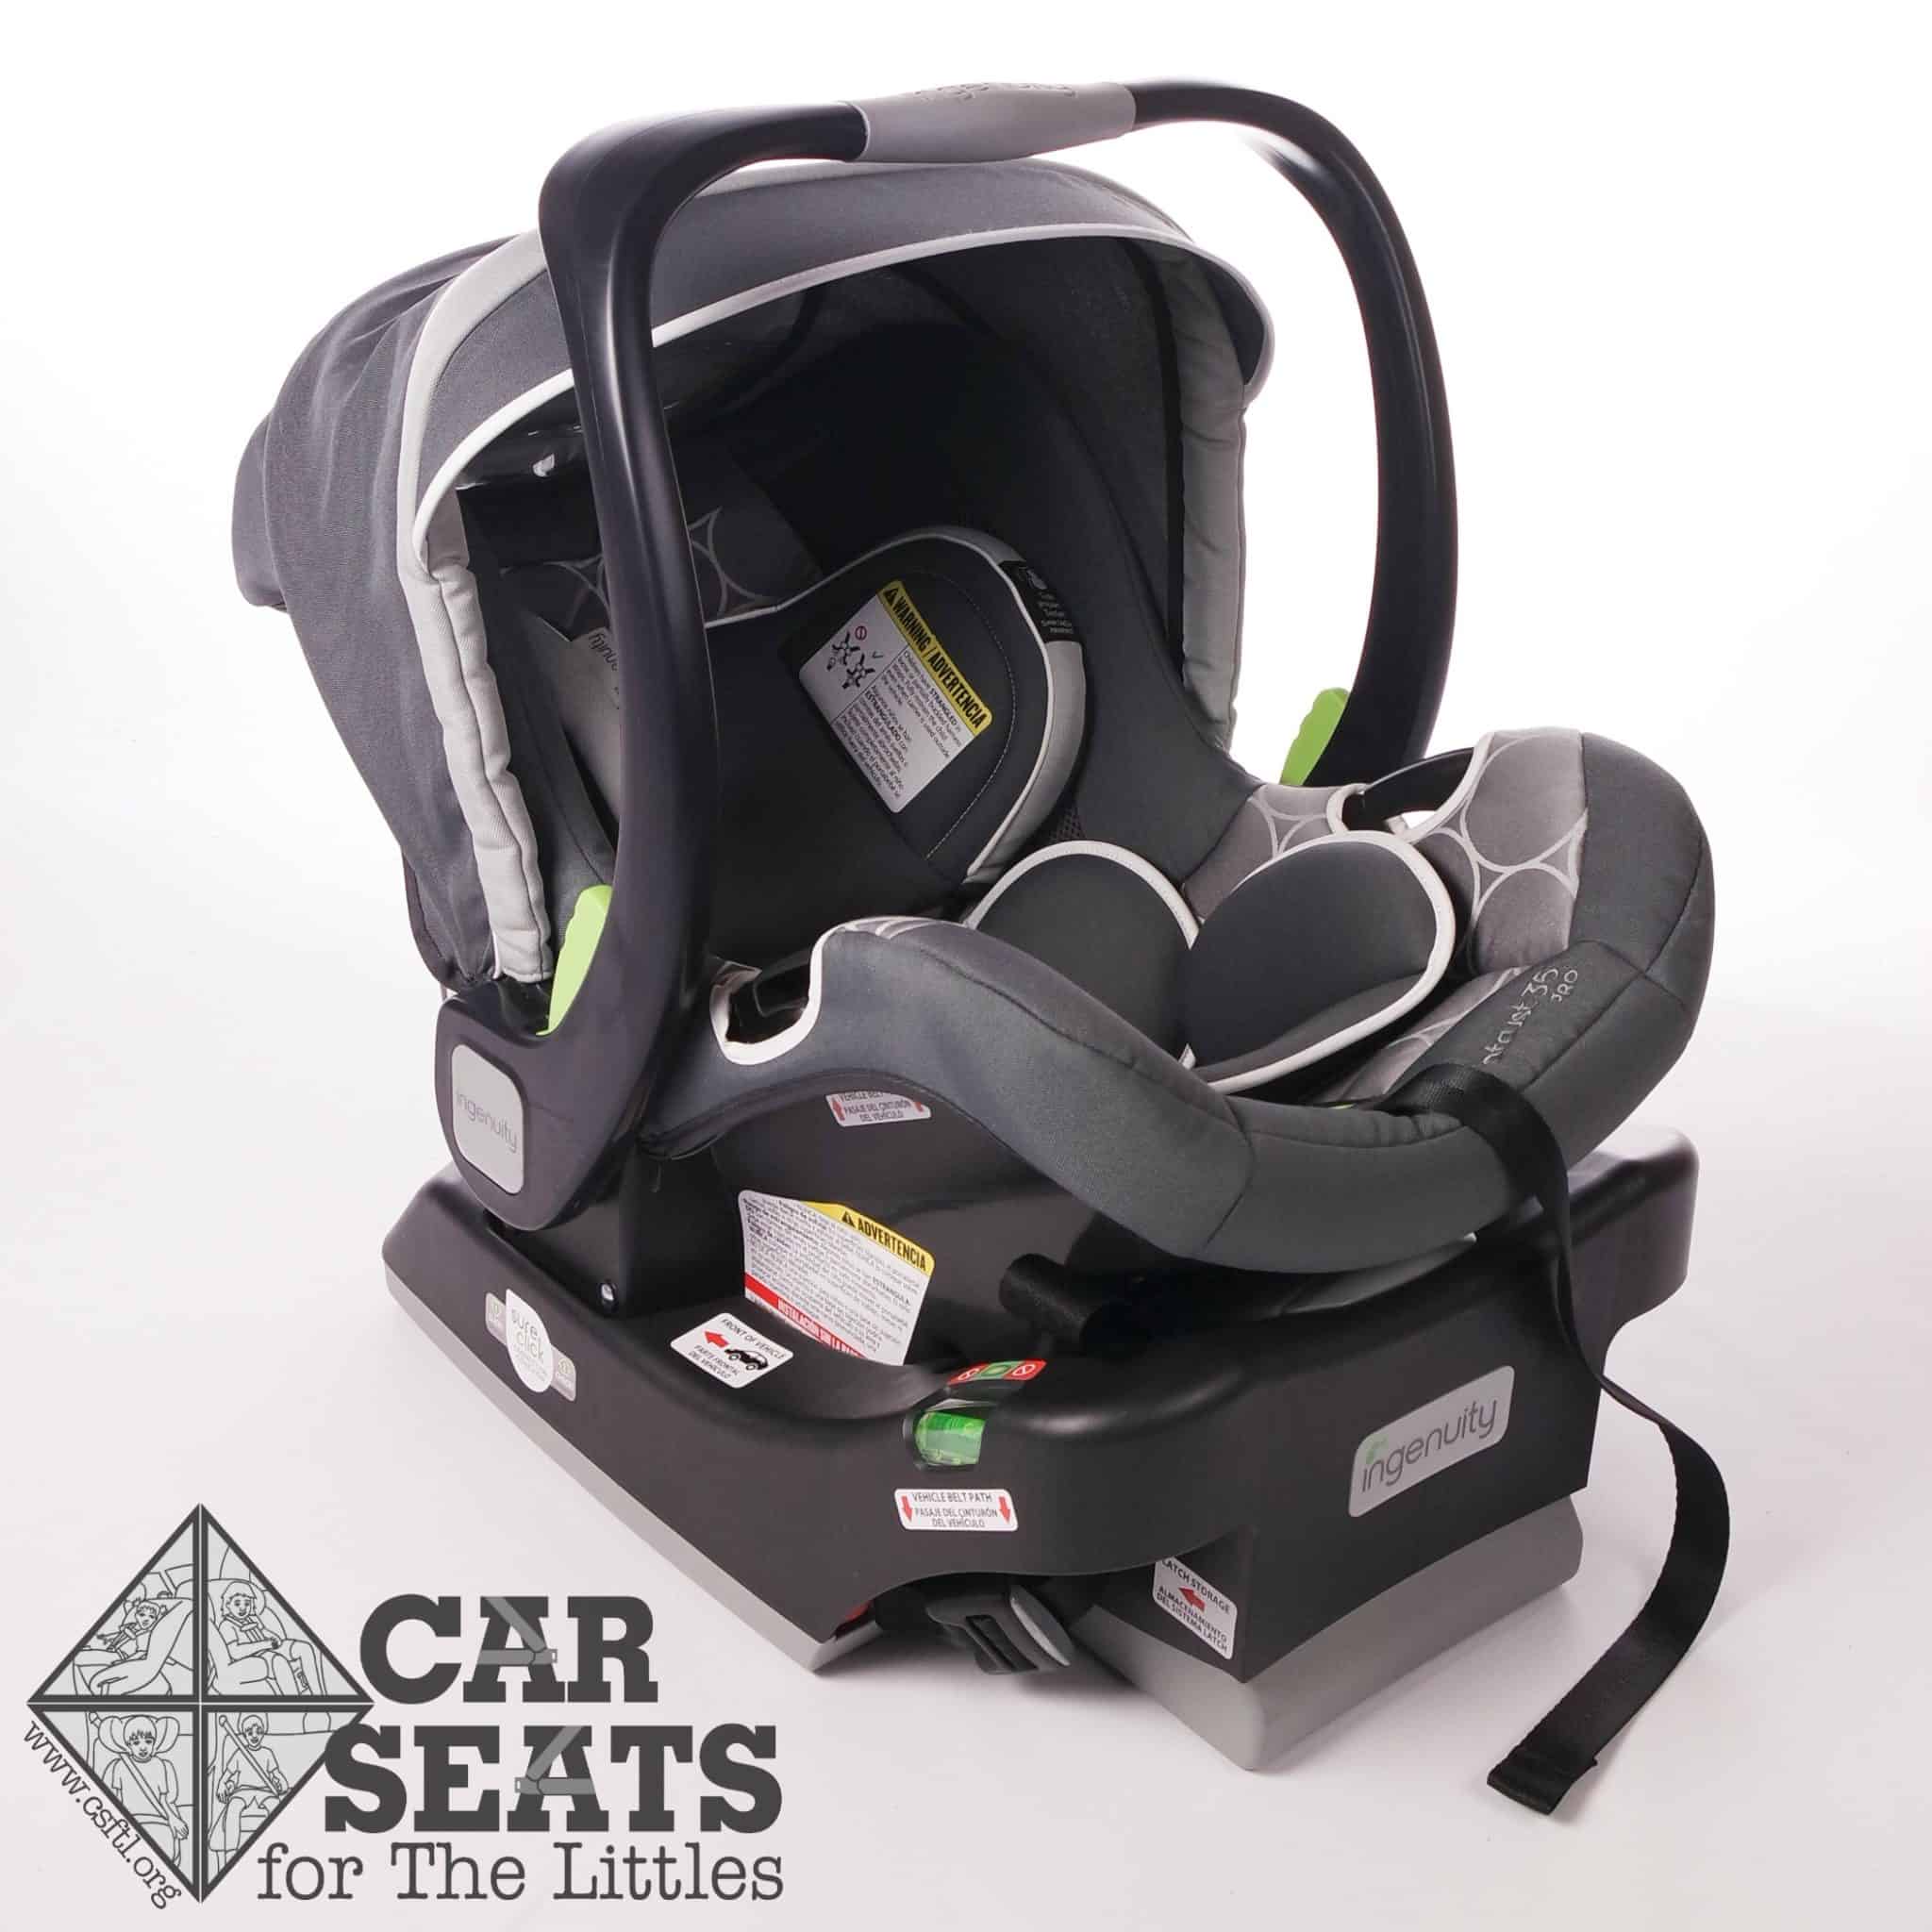 Car seats for the littles facebook